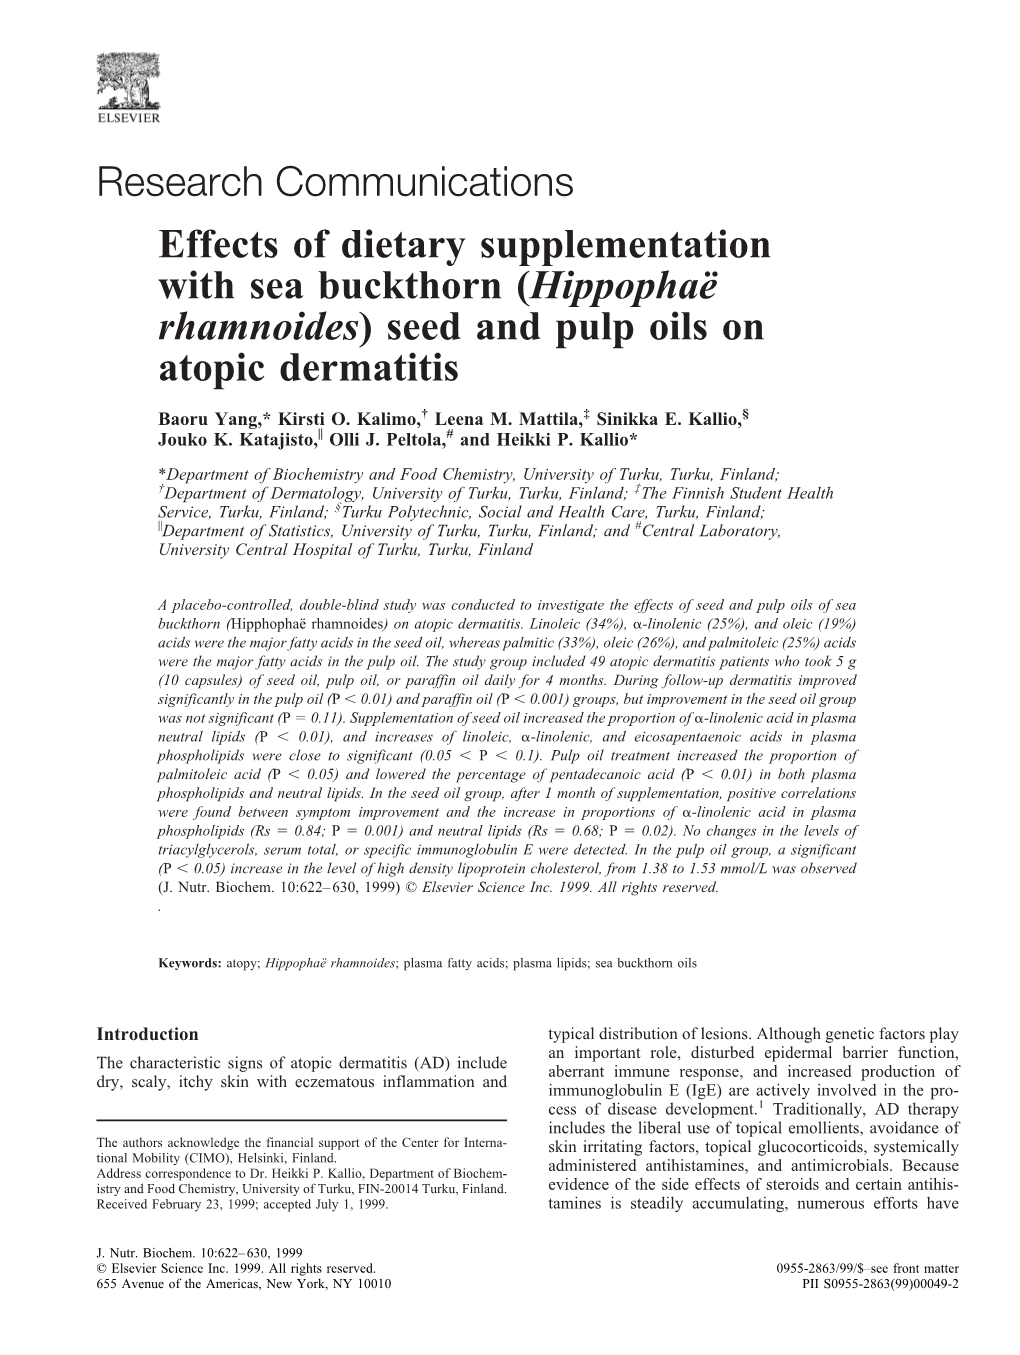 Research Communications Effects of Dietary Supplementation with Sea Buckthorn (Hippophaë Rhamnoides) Seed and Pulp Oils on Atop